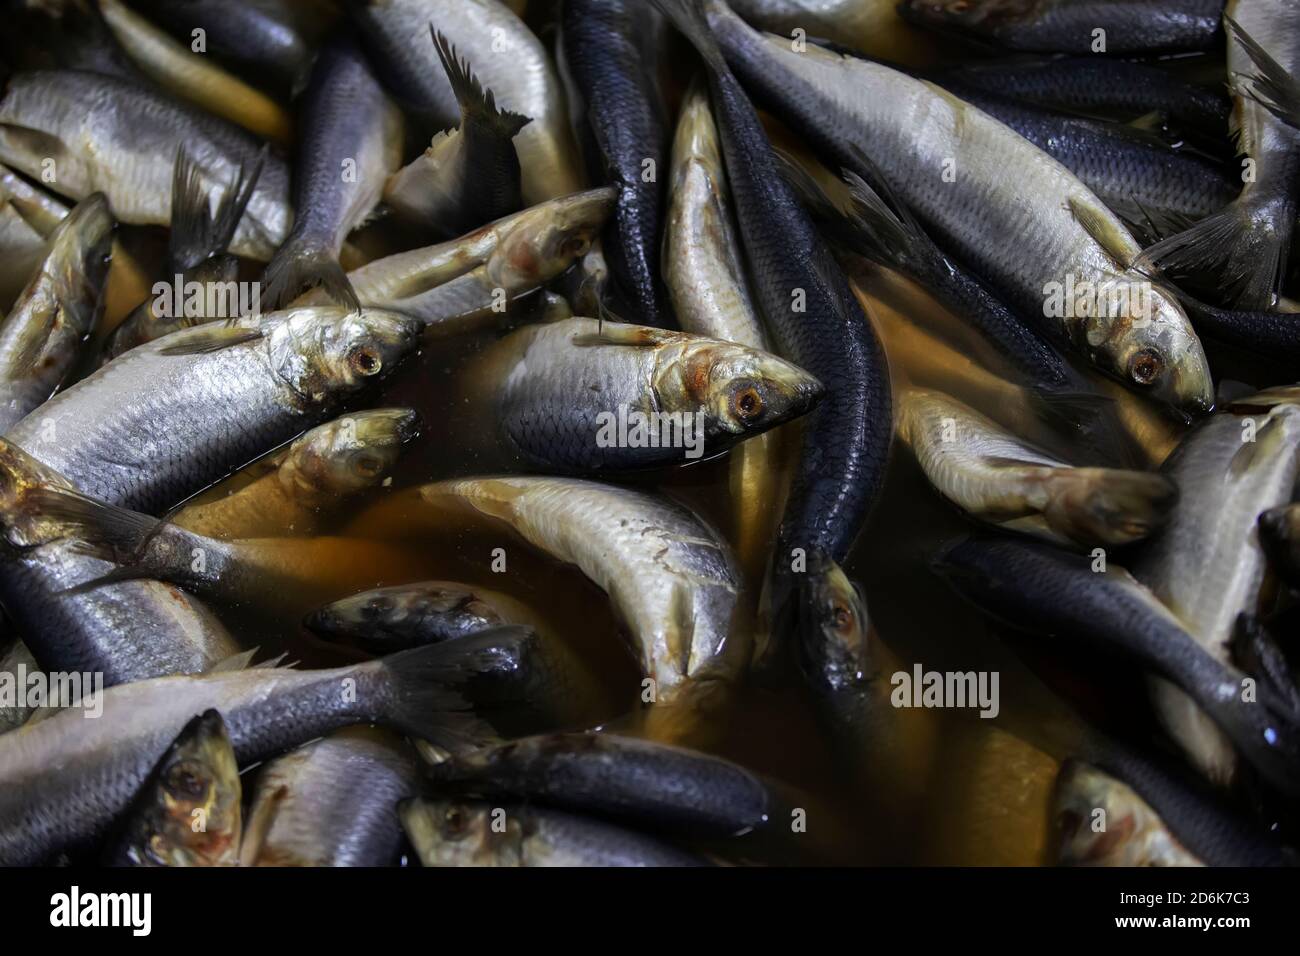 Smelly Fish High Resolution Stock Photography and Images - Alamy